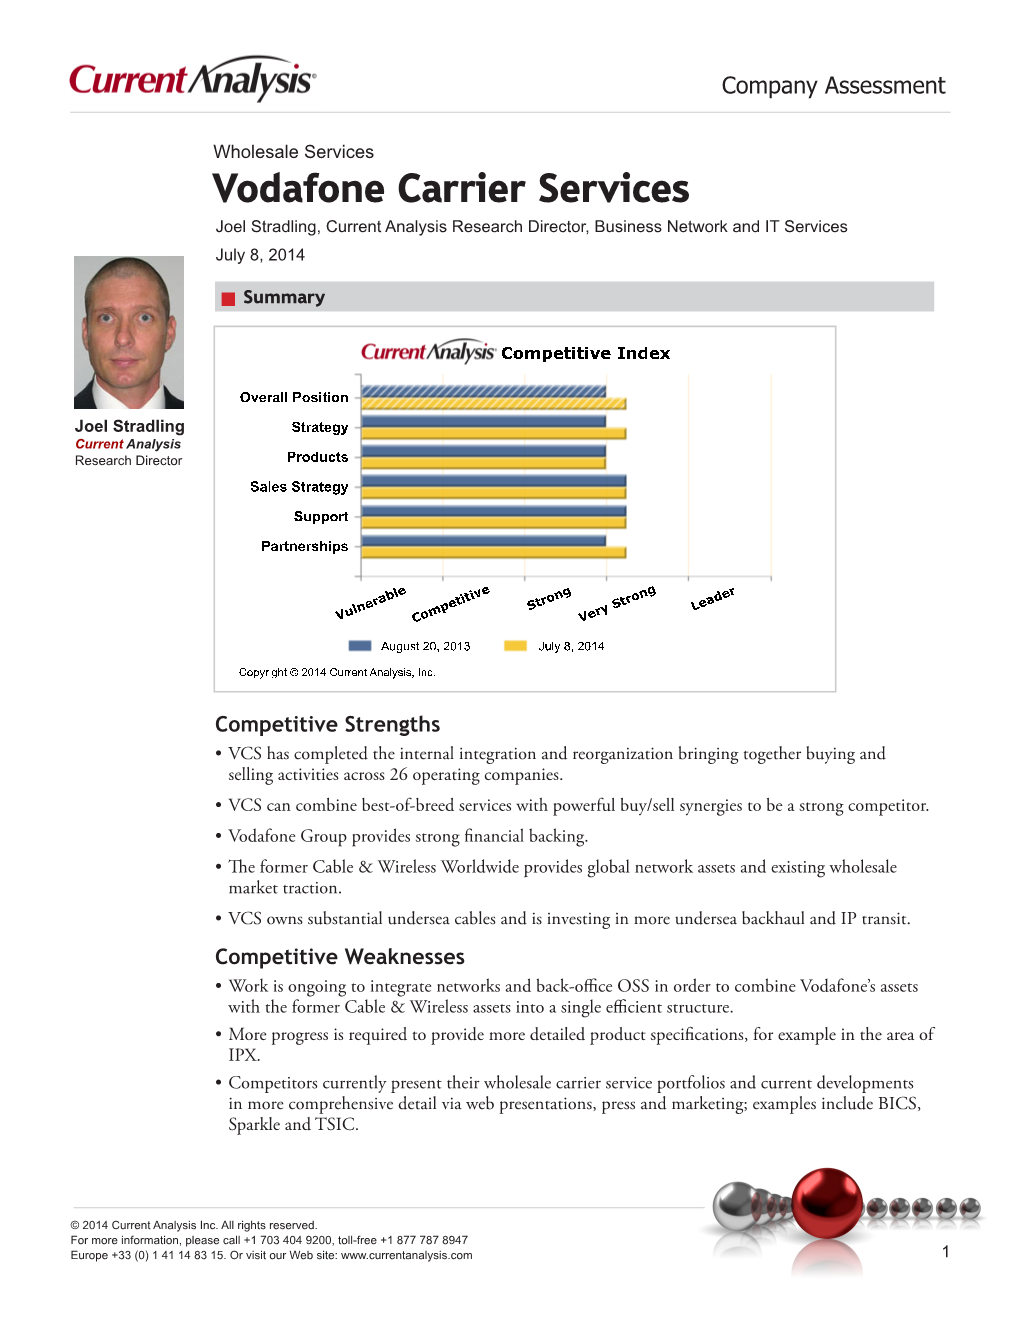 Vodafone Carrier Services Joel Stradling, Current Analysis Research Director, Business Network and IT Services July 8, 2014